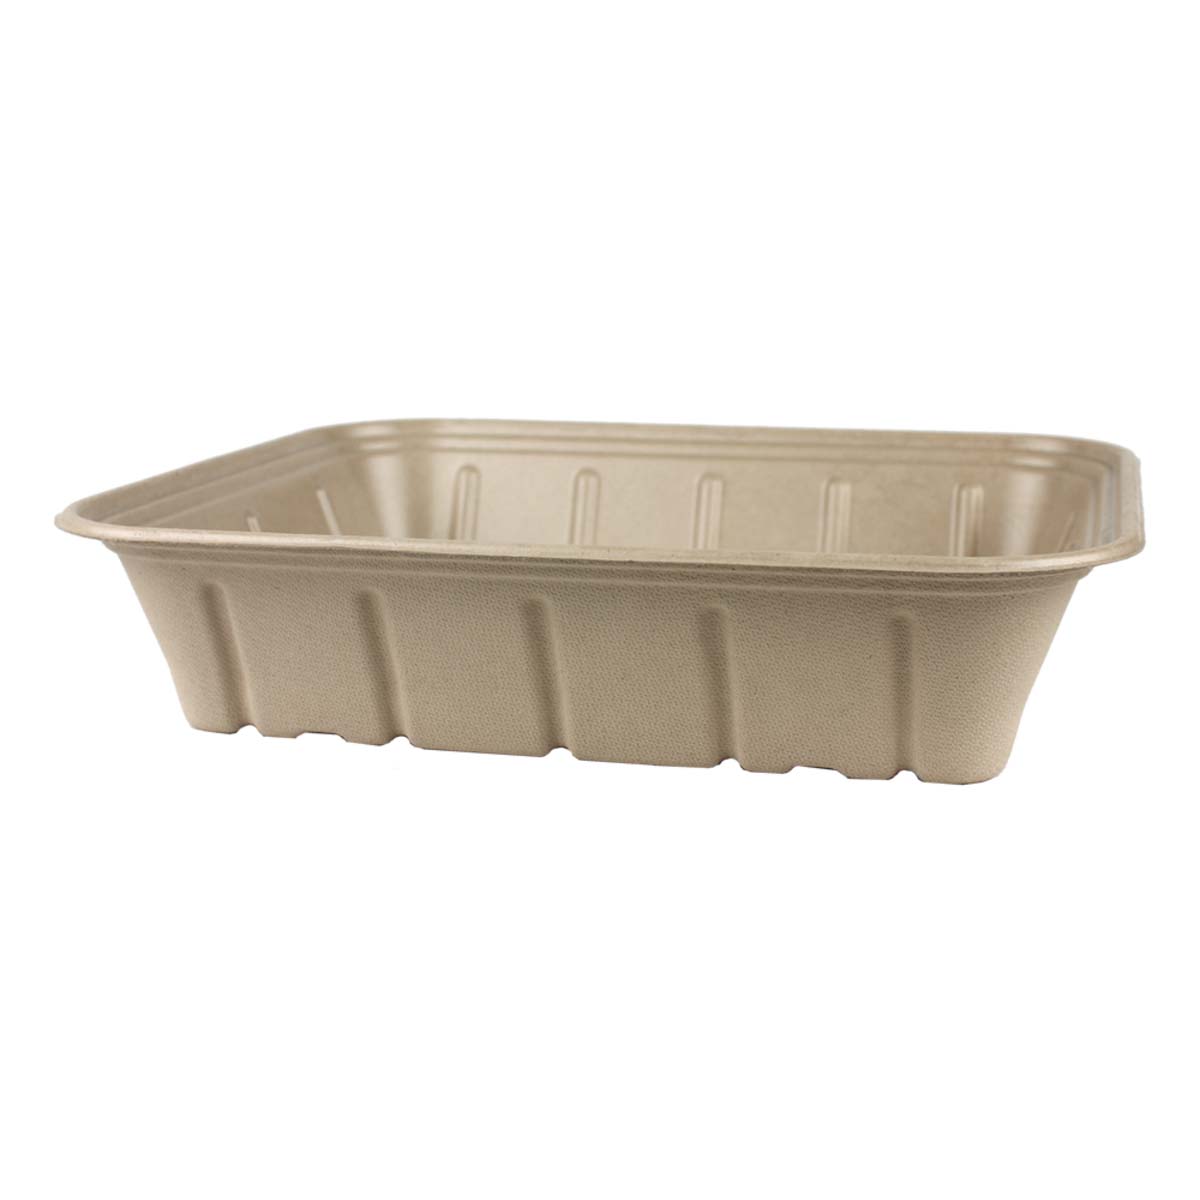 New compostable lunch trays increase cost – The Gillnetter